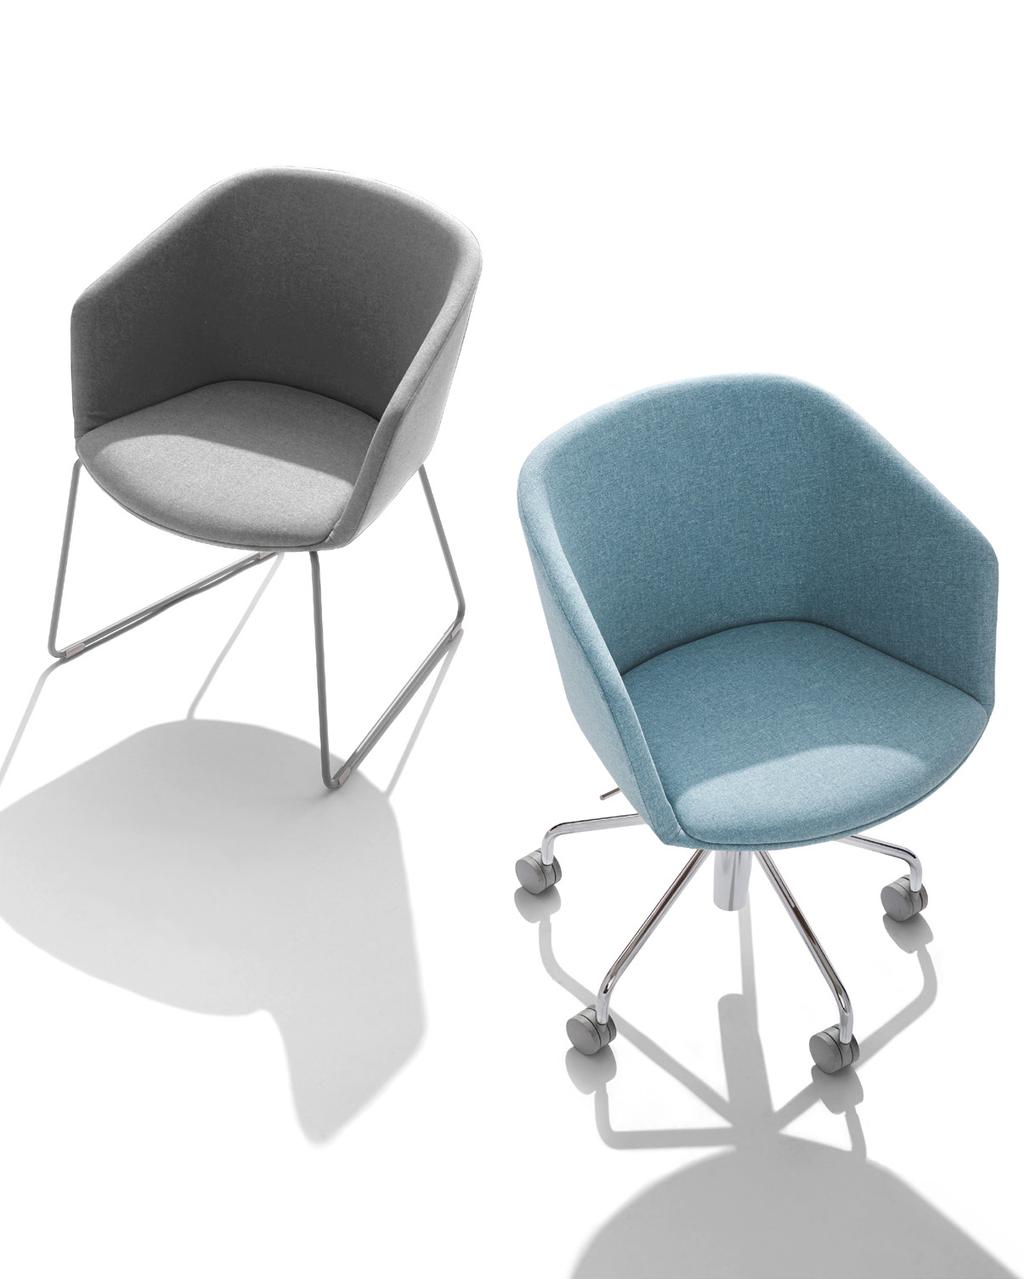 1 2 Pitch Collection Simple + Streamlined Ideal for casual office seating, our Pitch Collection is